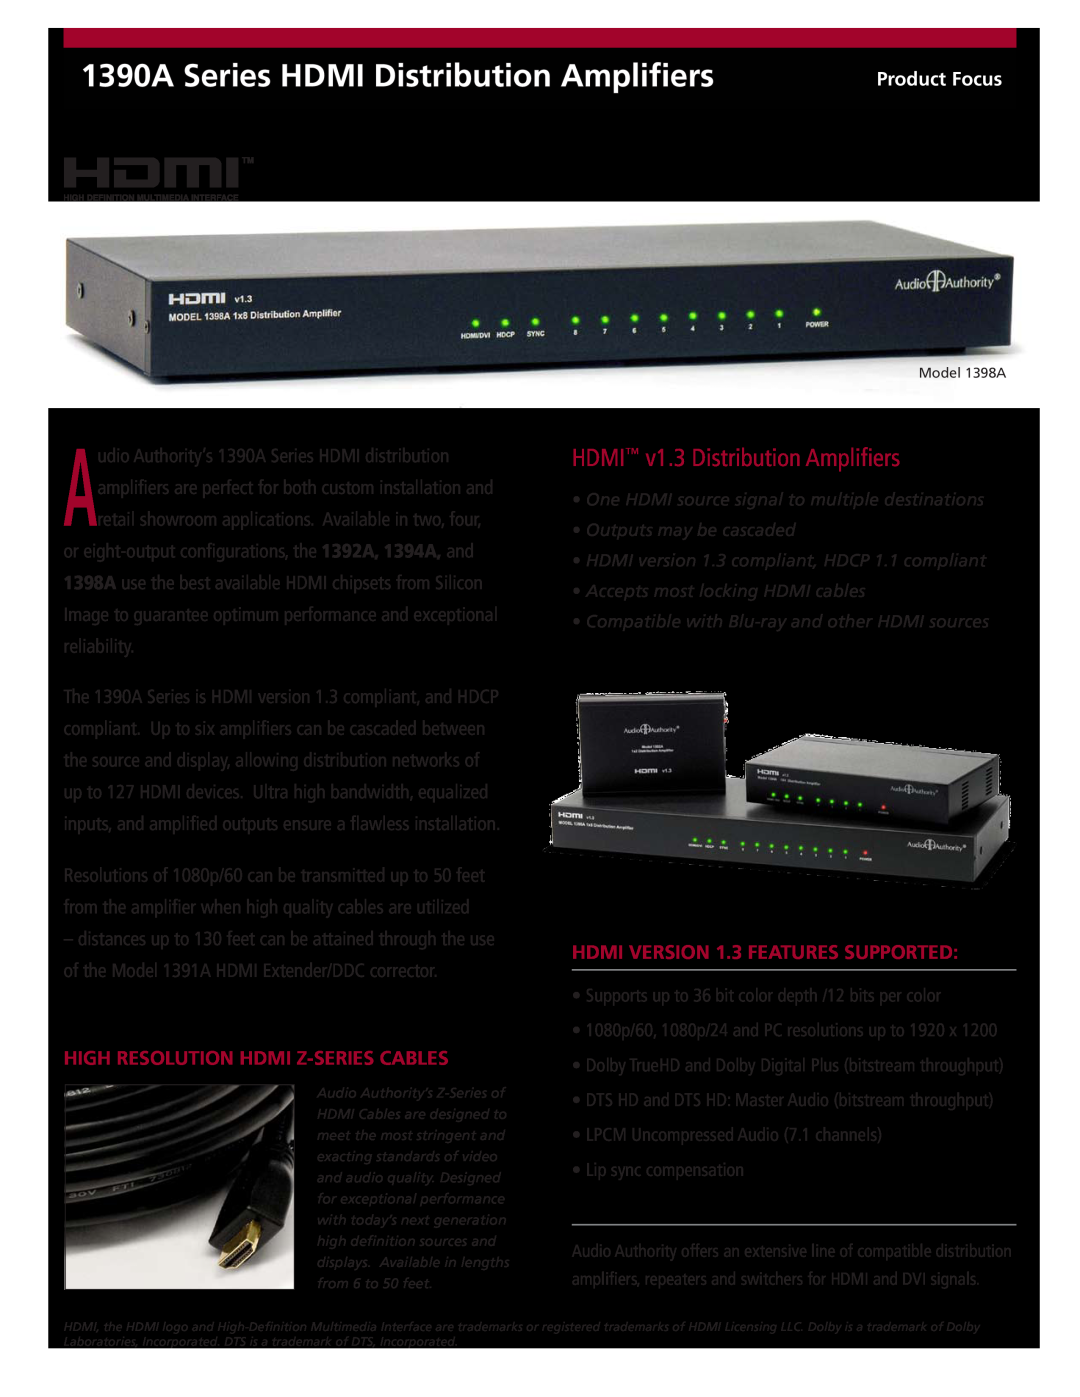 Audio Authority 1390A Series manual High Resolution Hdmi Z-Seriescables, HDMI VERSION 1.3 FEATURES SUPPORTED 